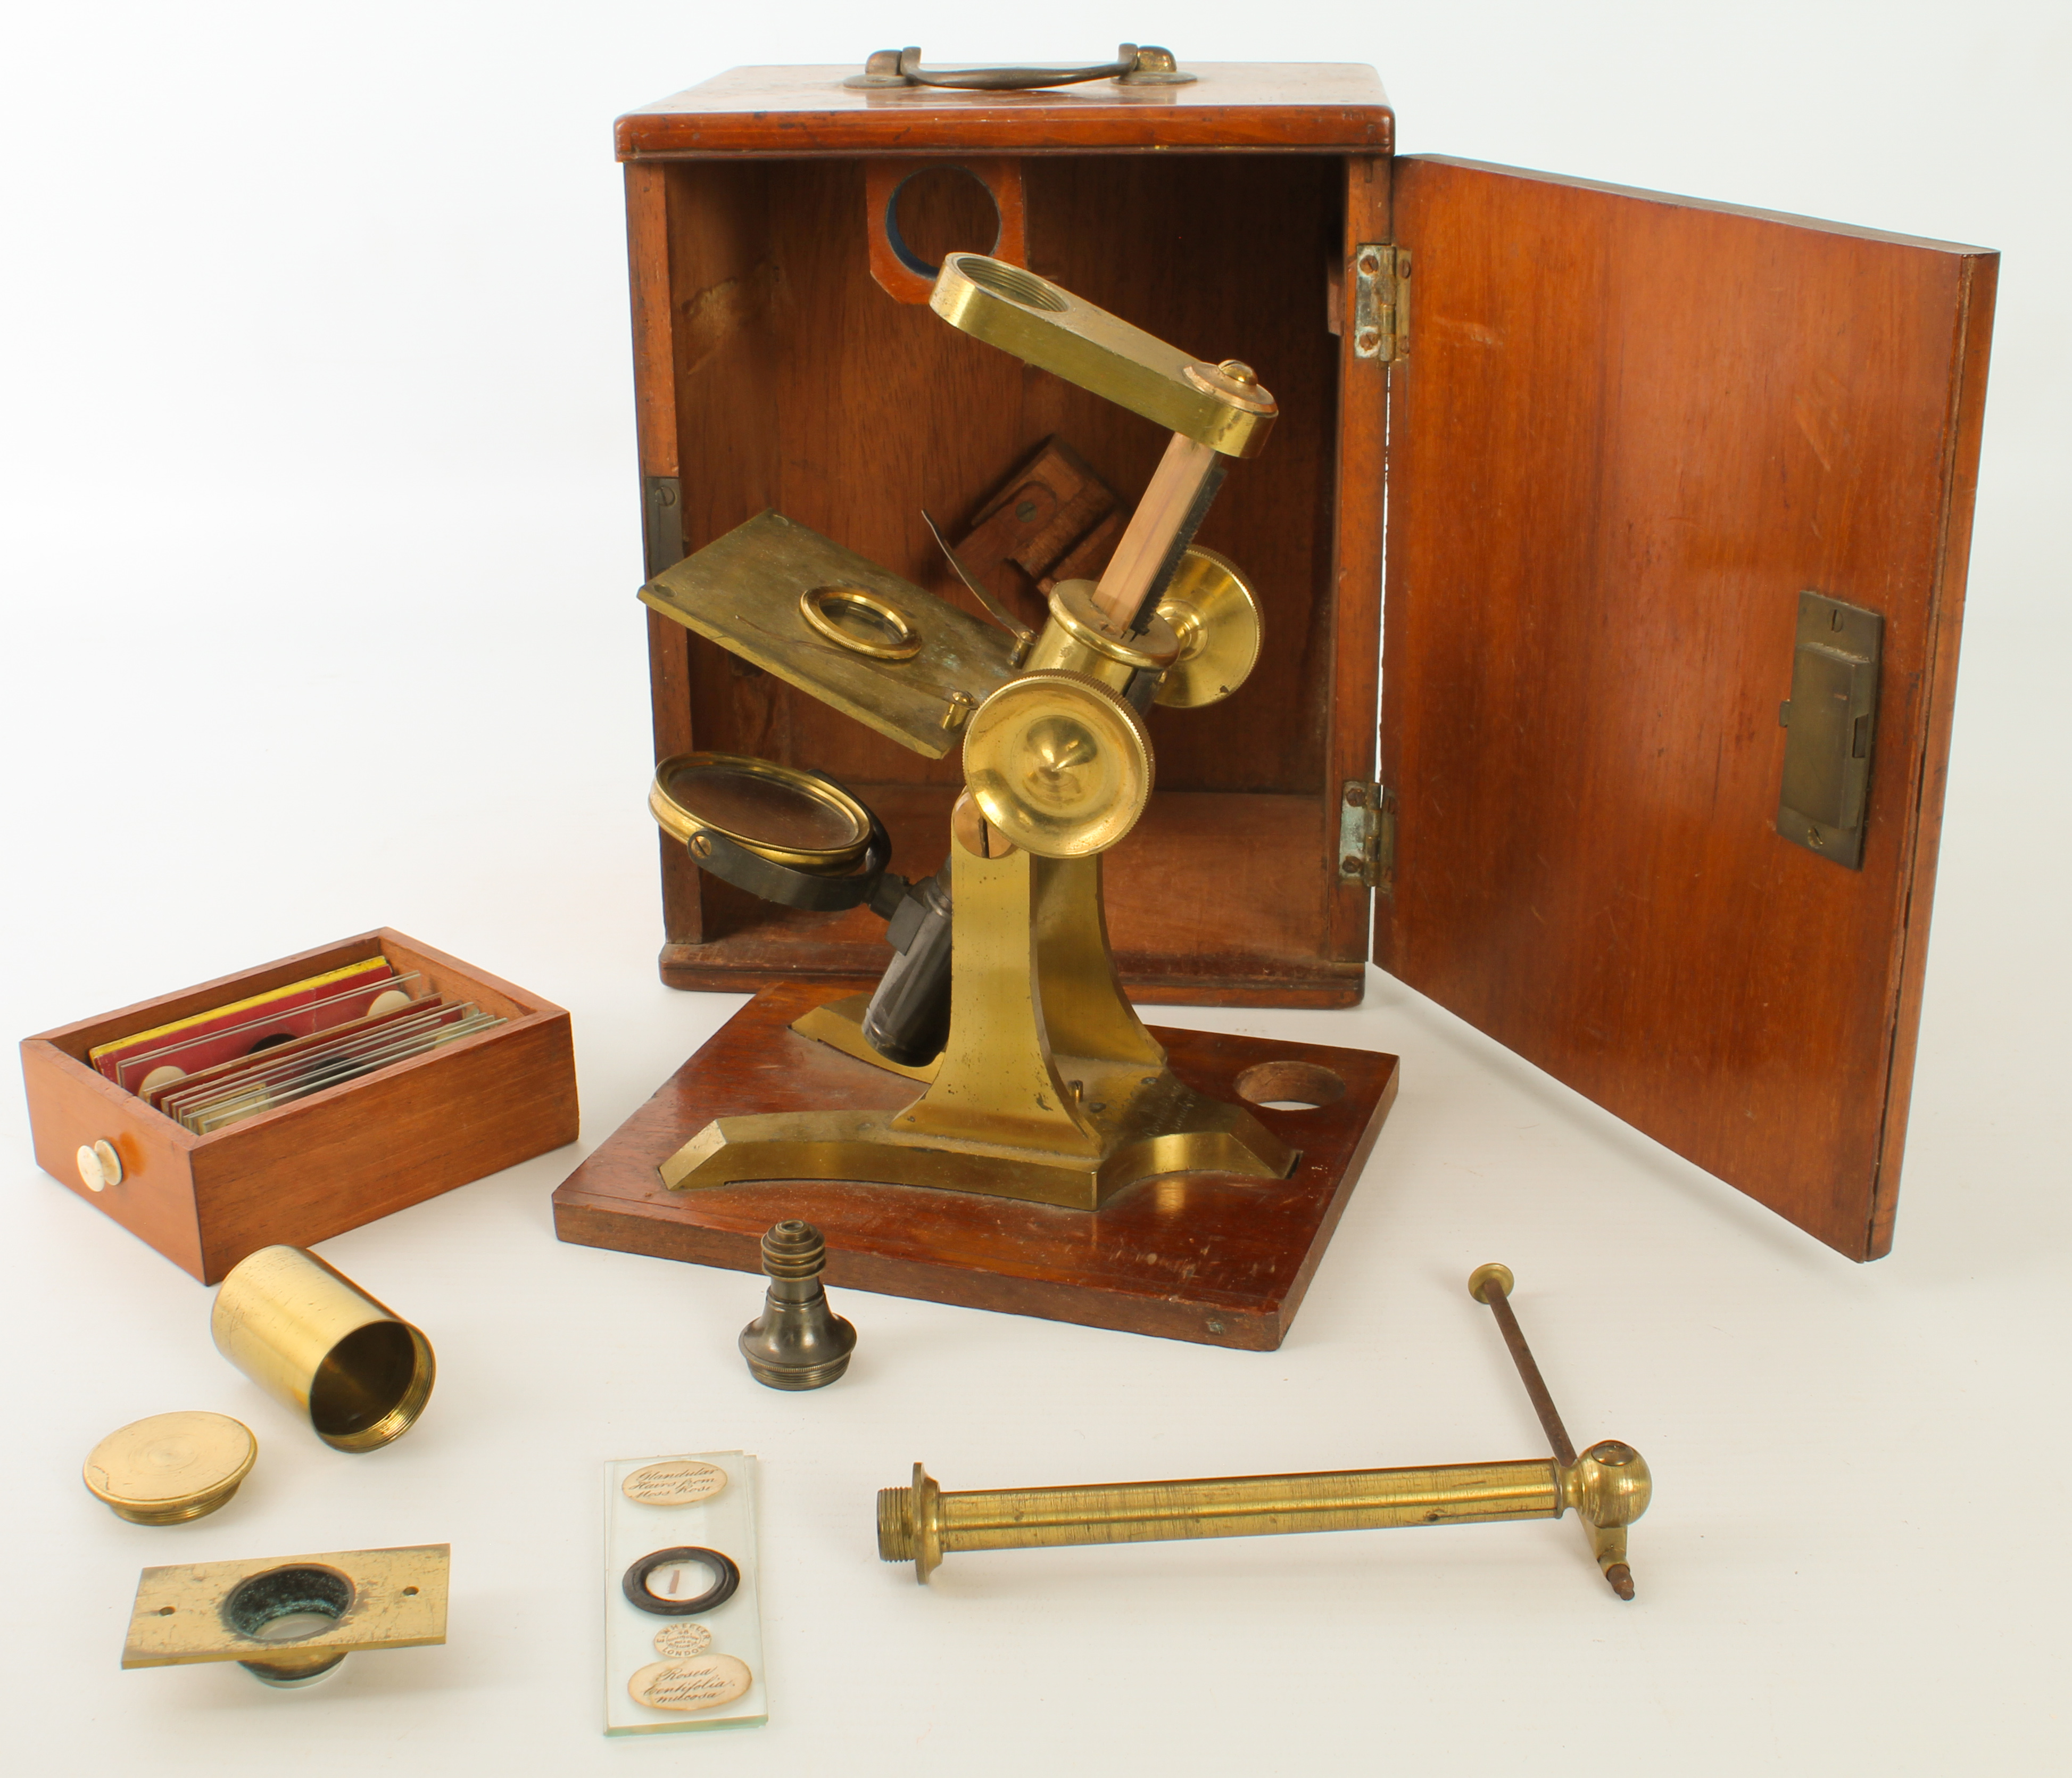 A Victorian lacquered brass microscope by W. Gray of London - lacks main tube, with rack and